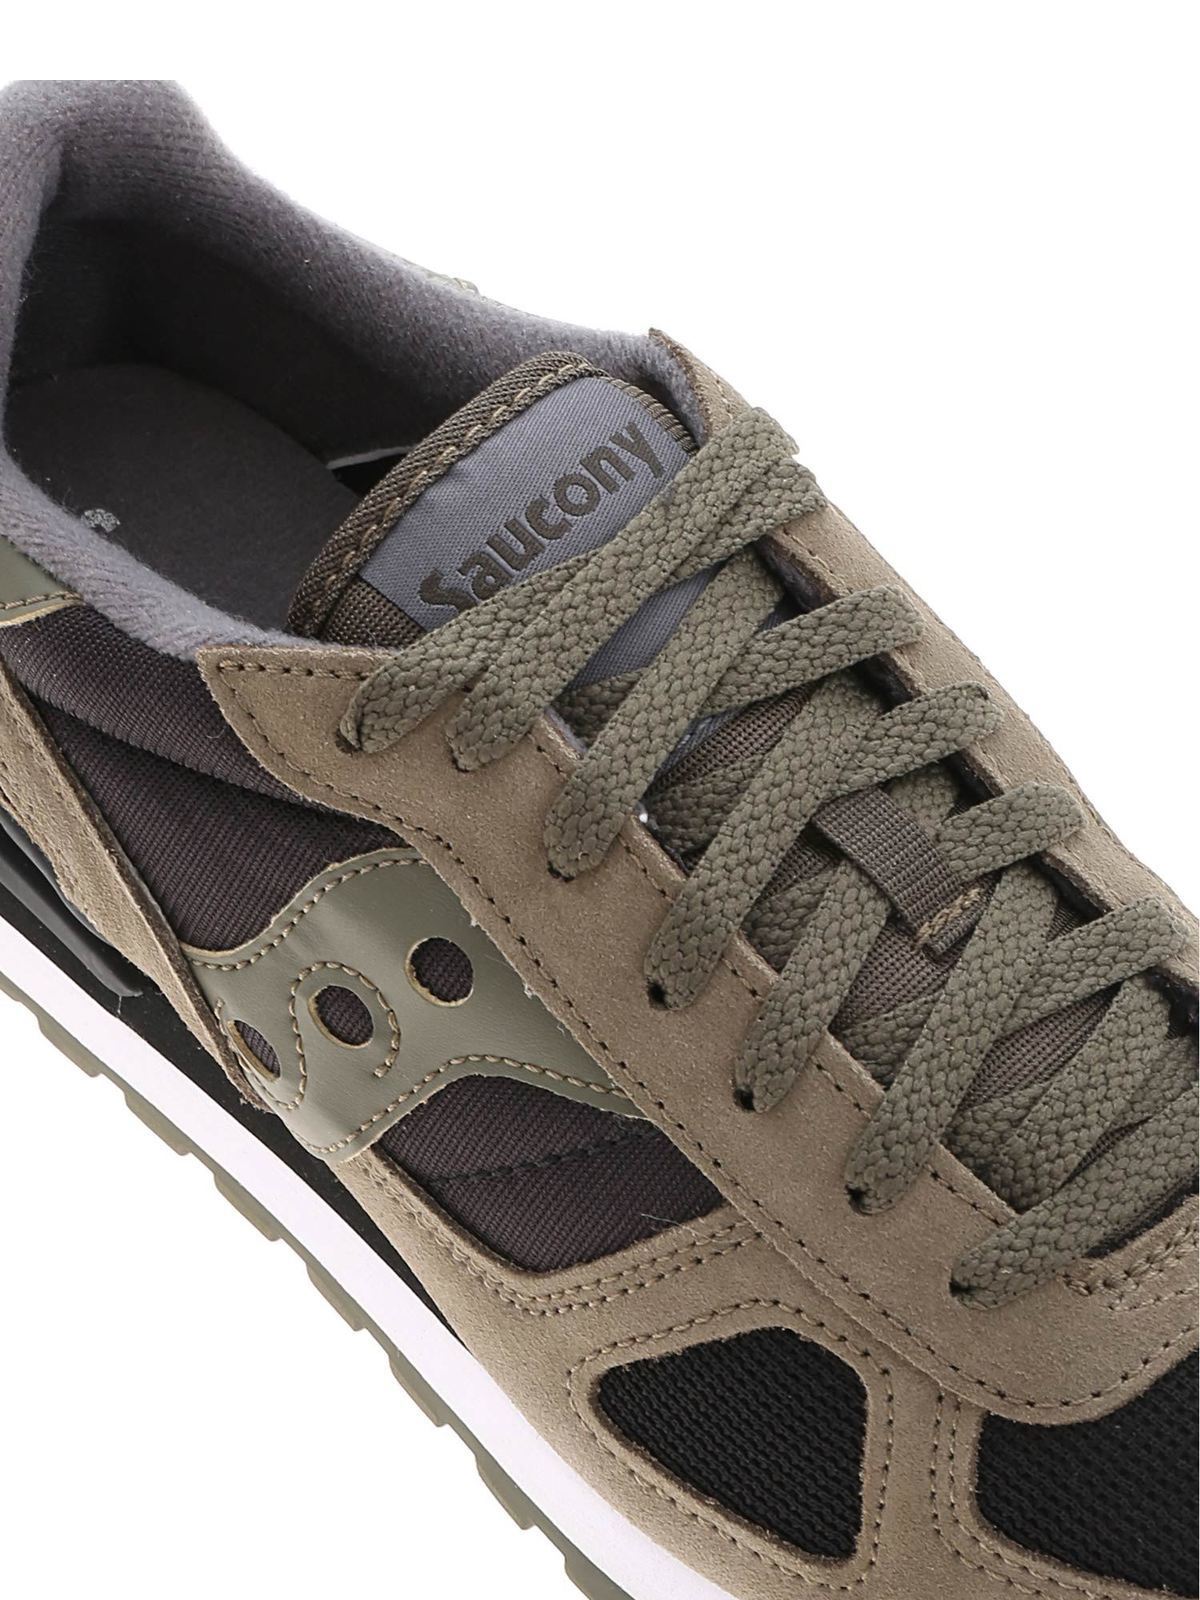 Saucony - Olive green and black Shadow 